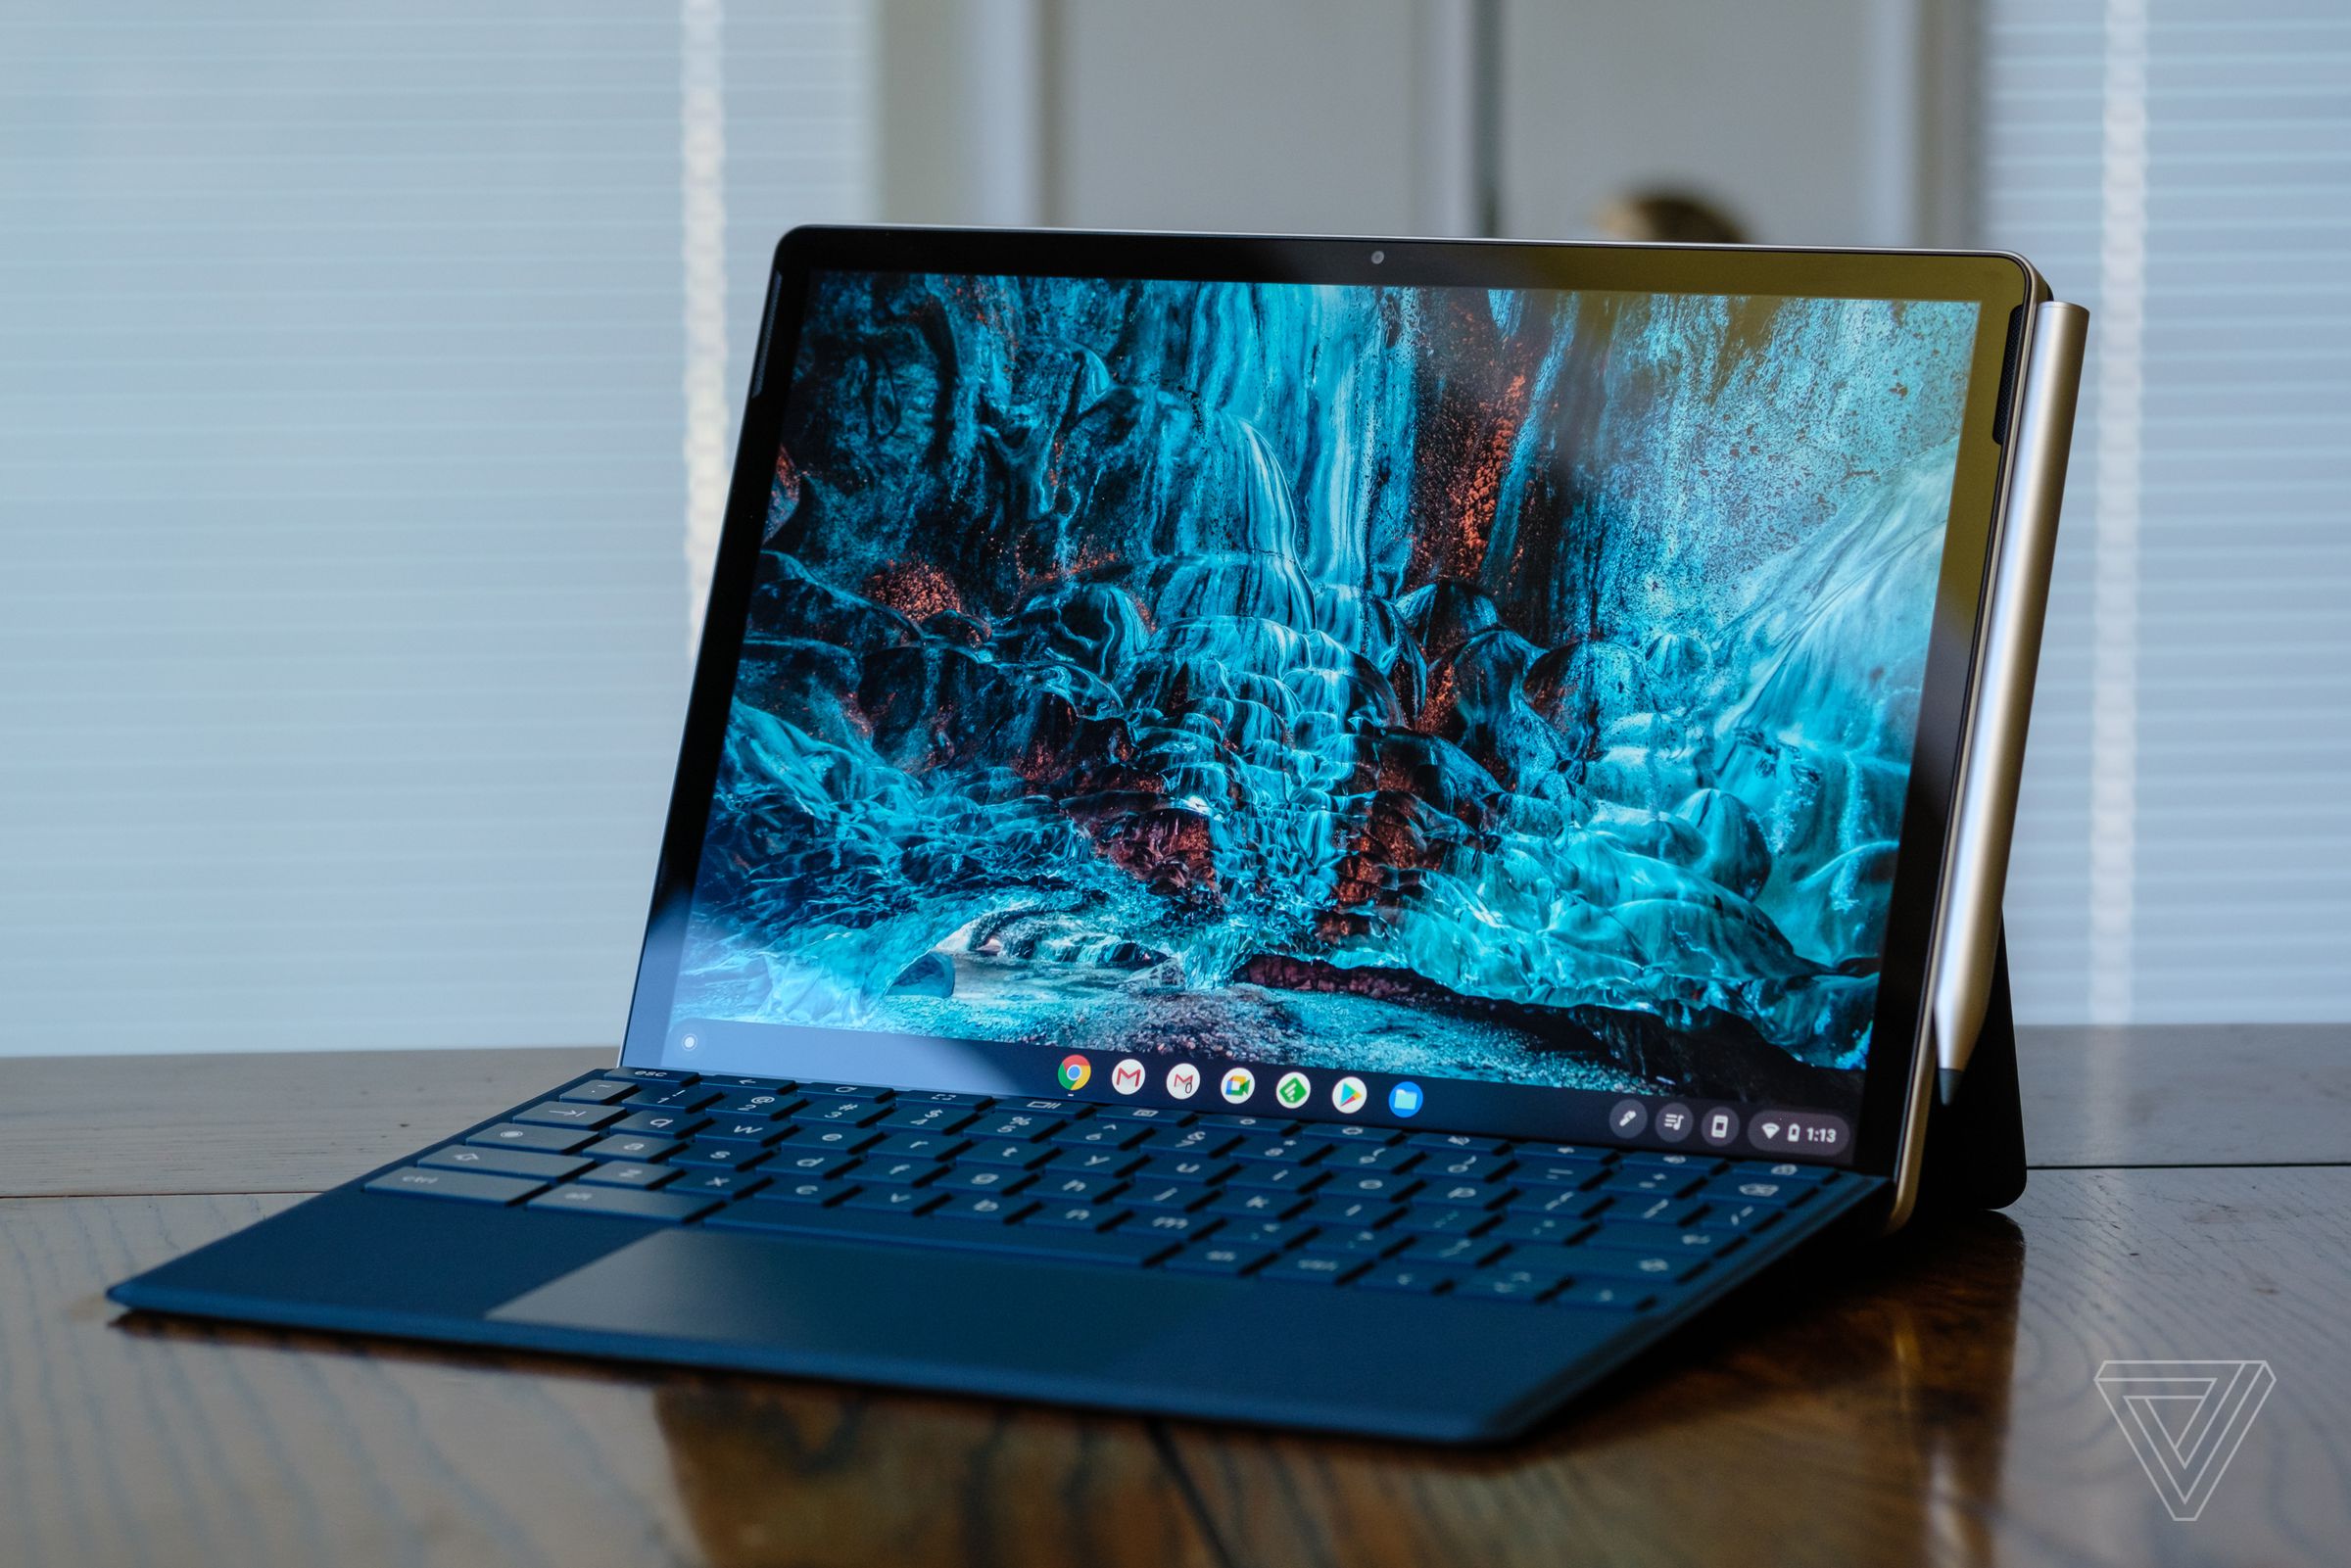 The HP resembles Microsoft’s Surface line of detachables